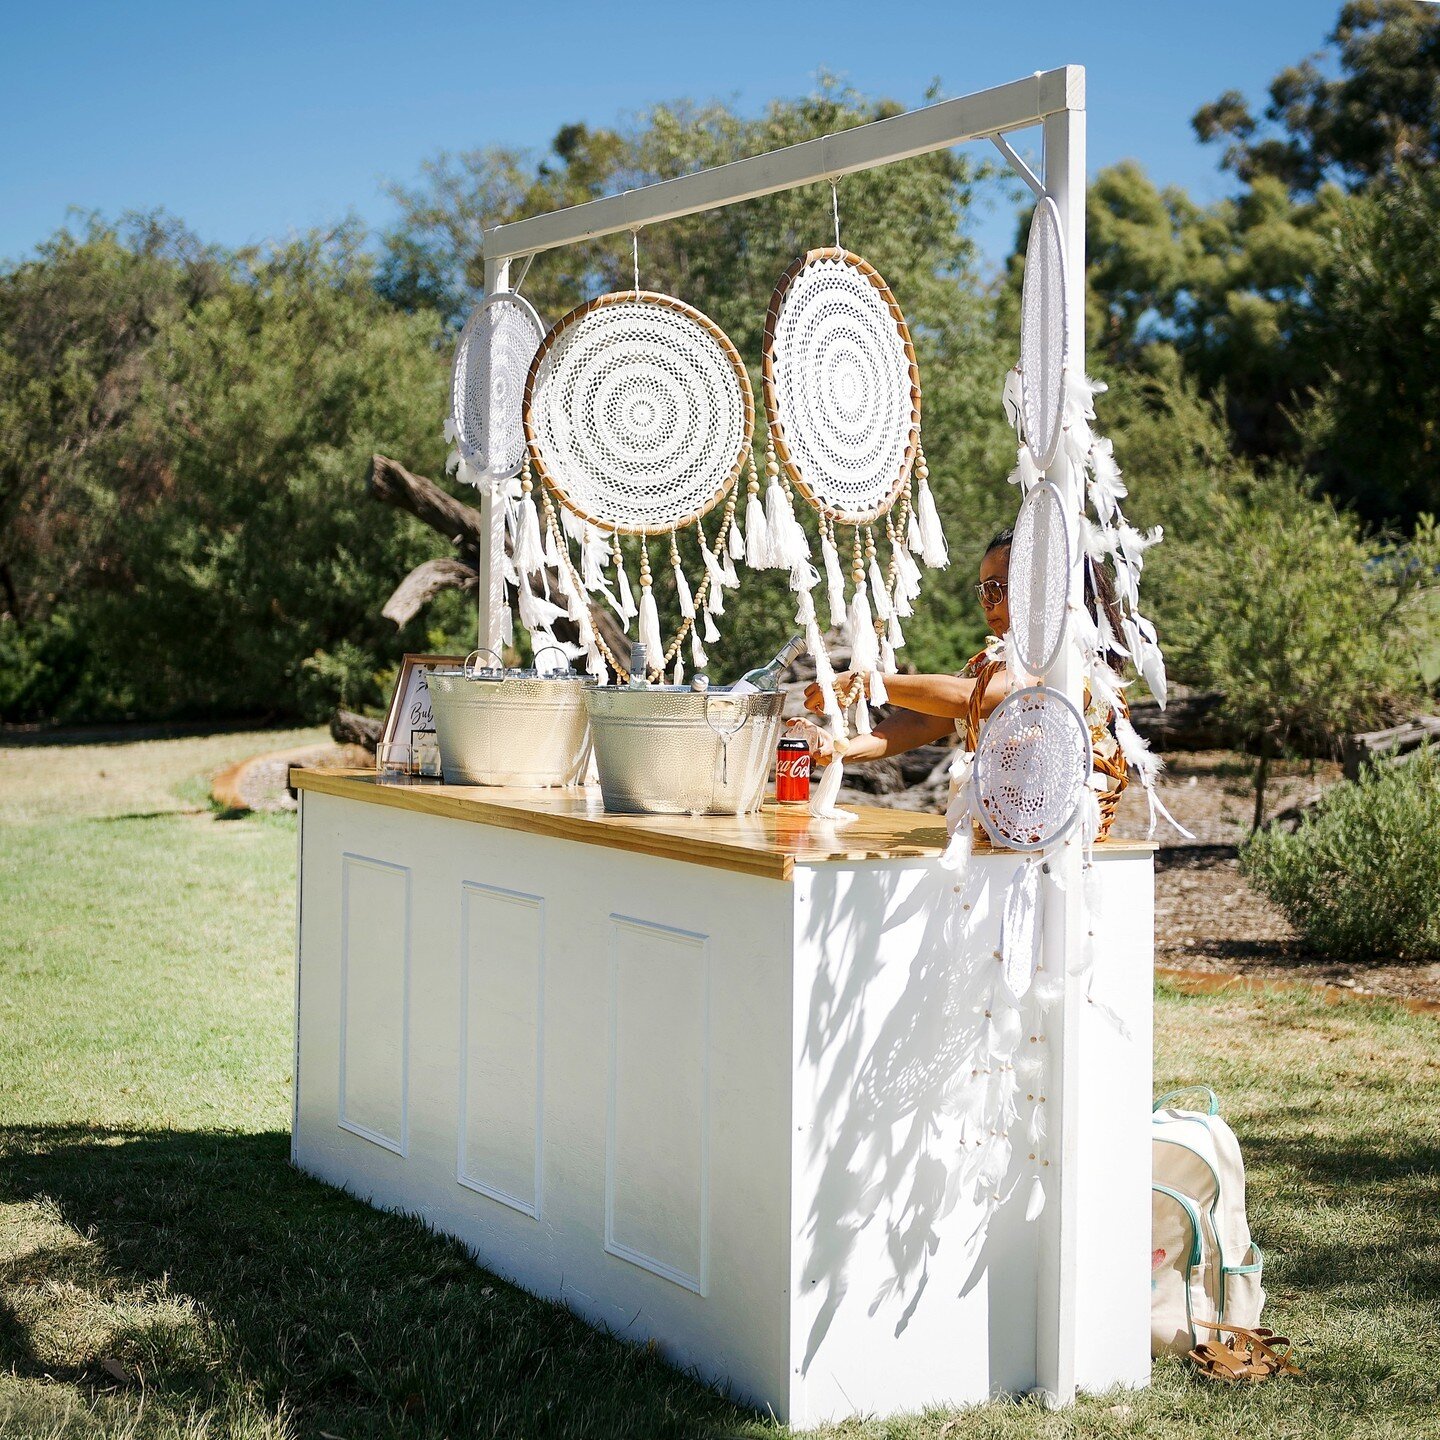 Caravan Bar&mdash;or Not?

If you're having a party and don't have room for a caravan bar, we have another option! 🎉🎉

Our pop-up bars are lightweight and portable, so they can be set up in any space. 

Some come with festoon lighting 💡 and some c